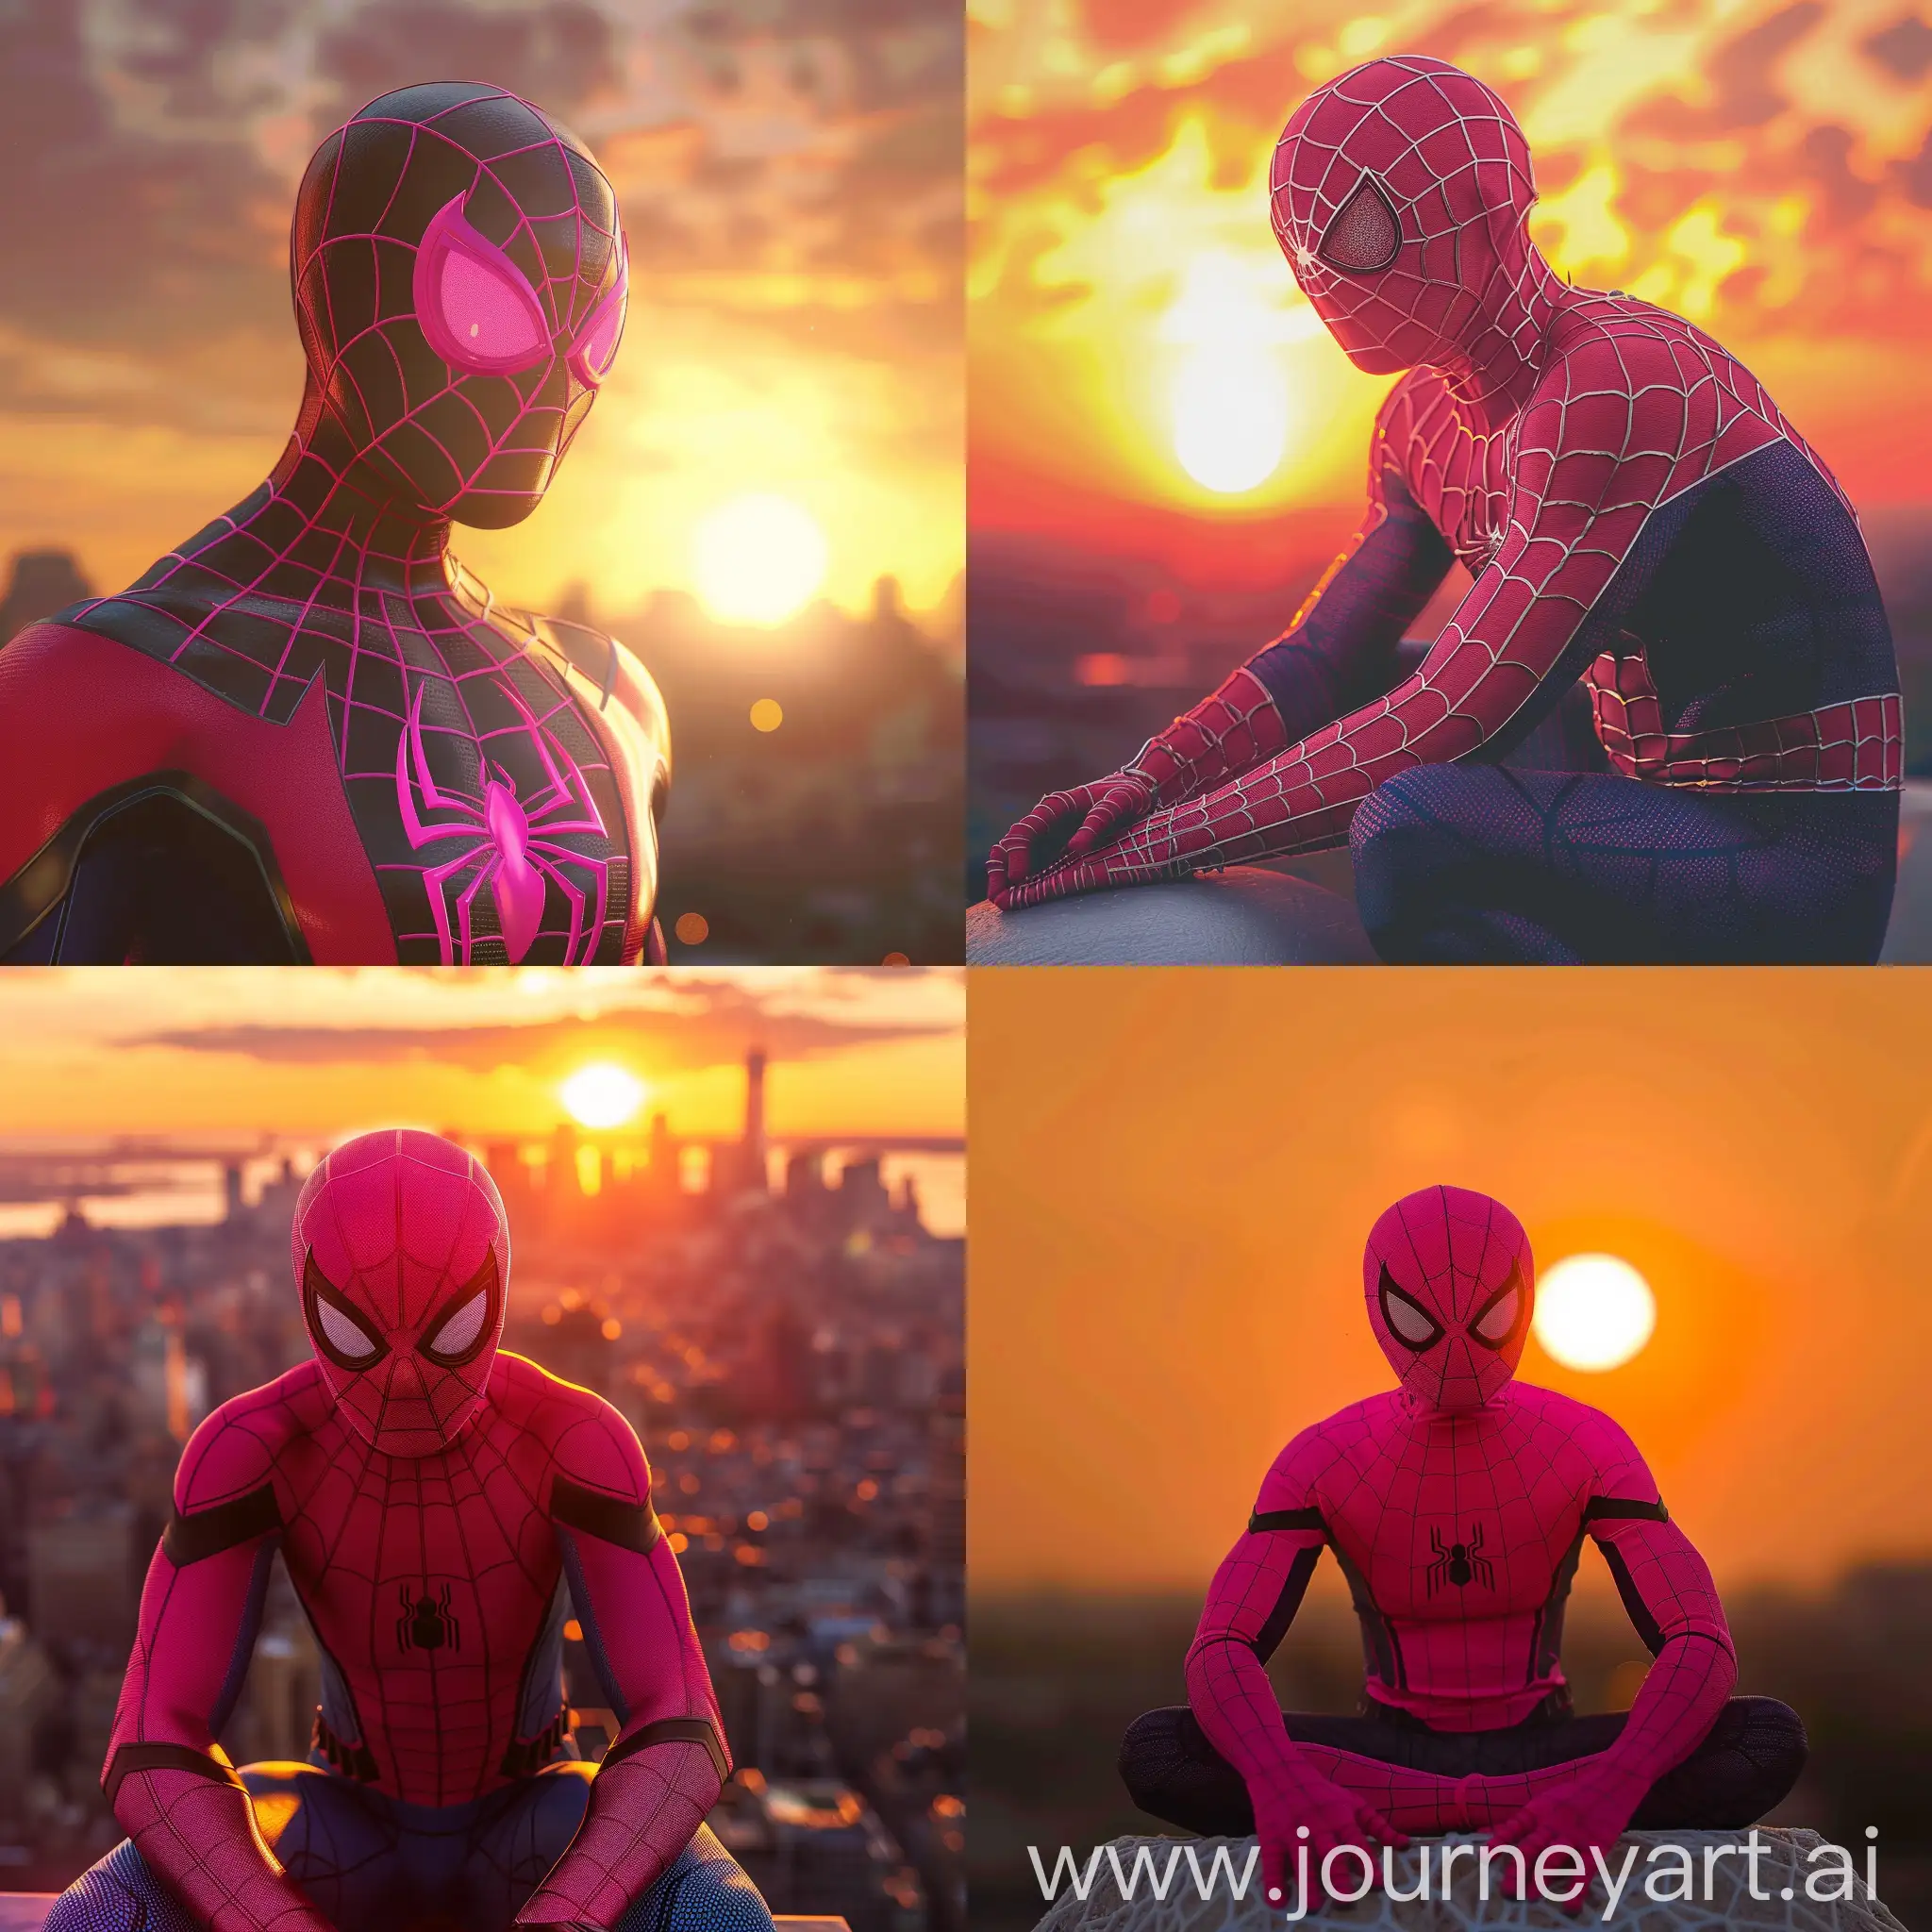 Pink-Spiderman-Silhouetted-Against-Sunset-Sky